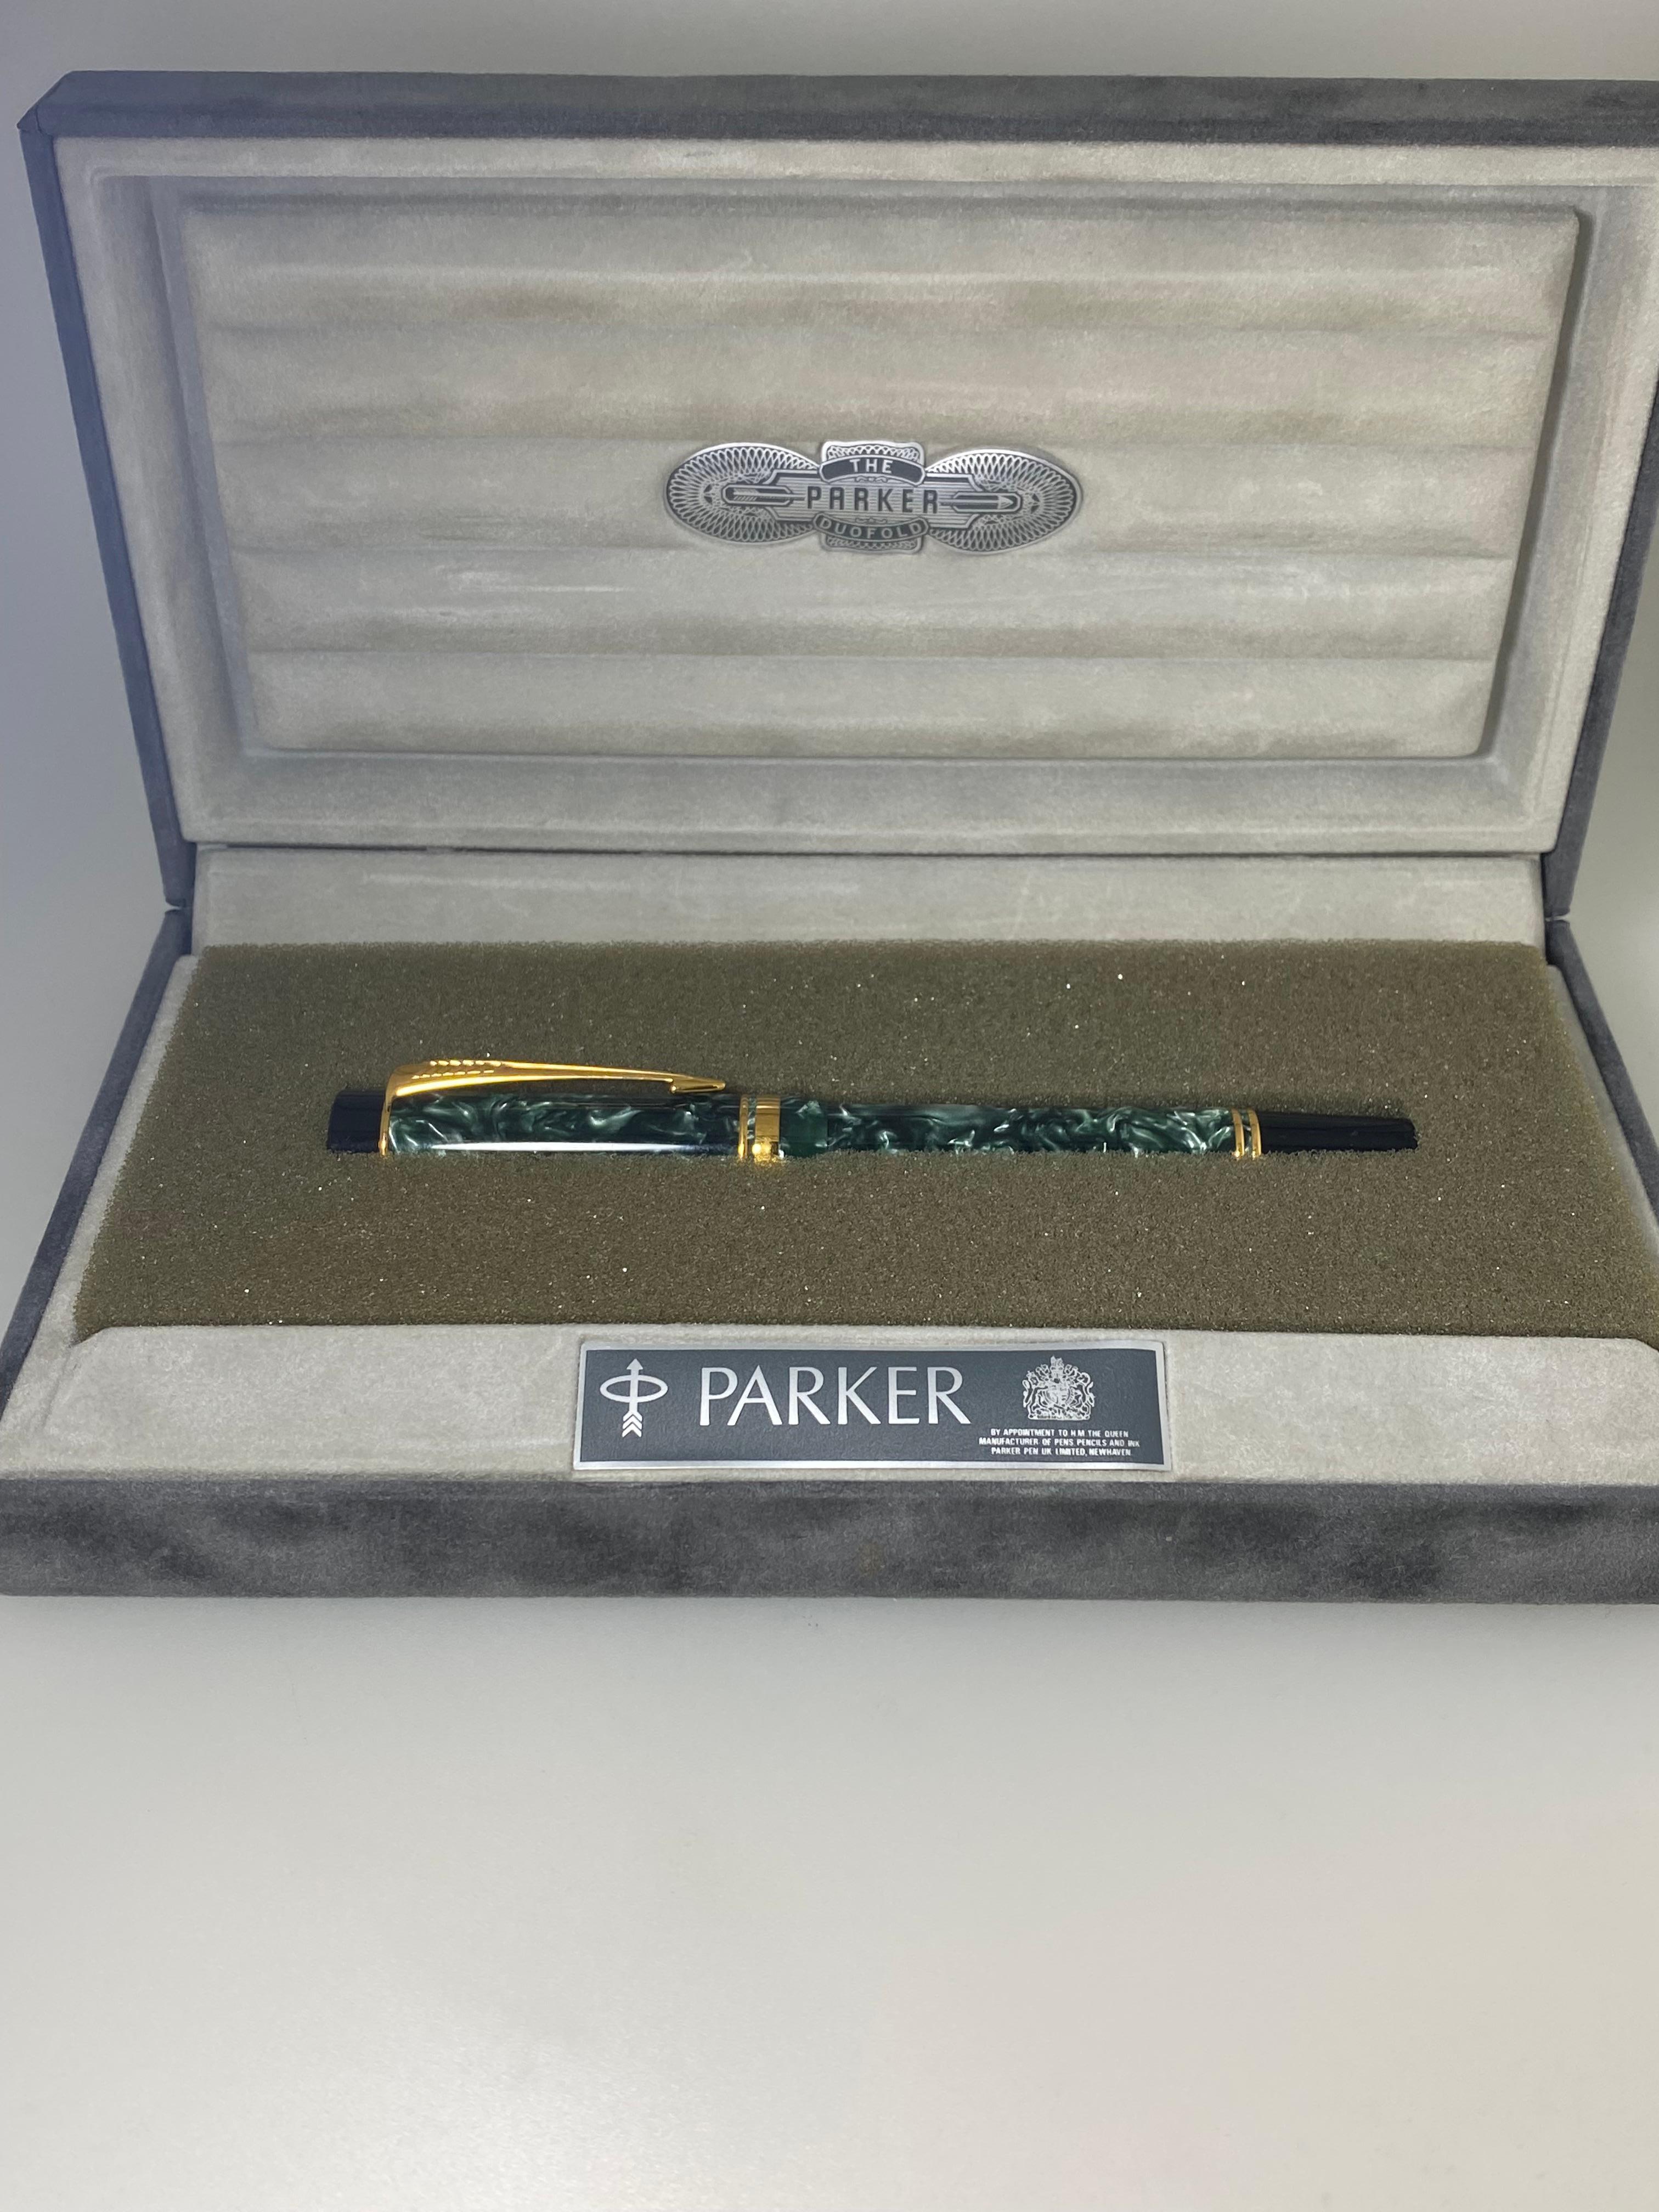 Parker DuoFold Fountain Pen
in gorgeous marble green, 
with black & gold accents

13.5cm long 
18K Yellow Gold Broad Nib
Brand New

Comes in original box, 
accompanied by replacement cartridges